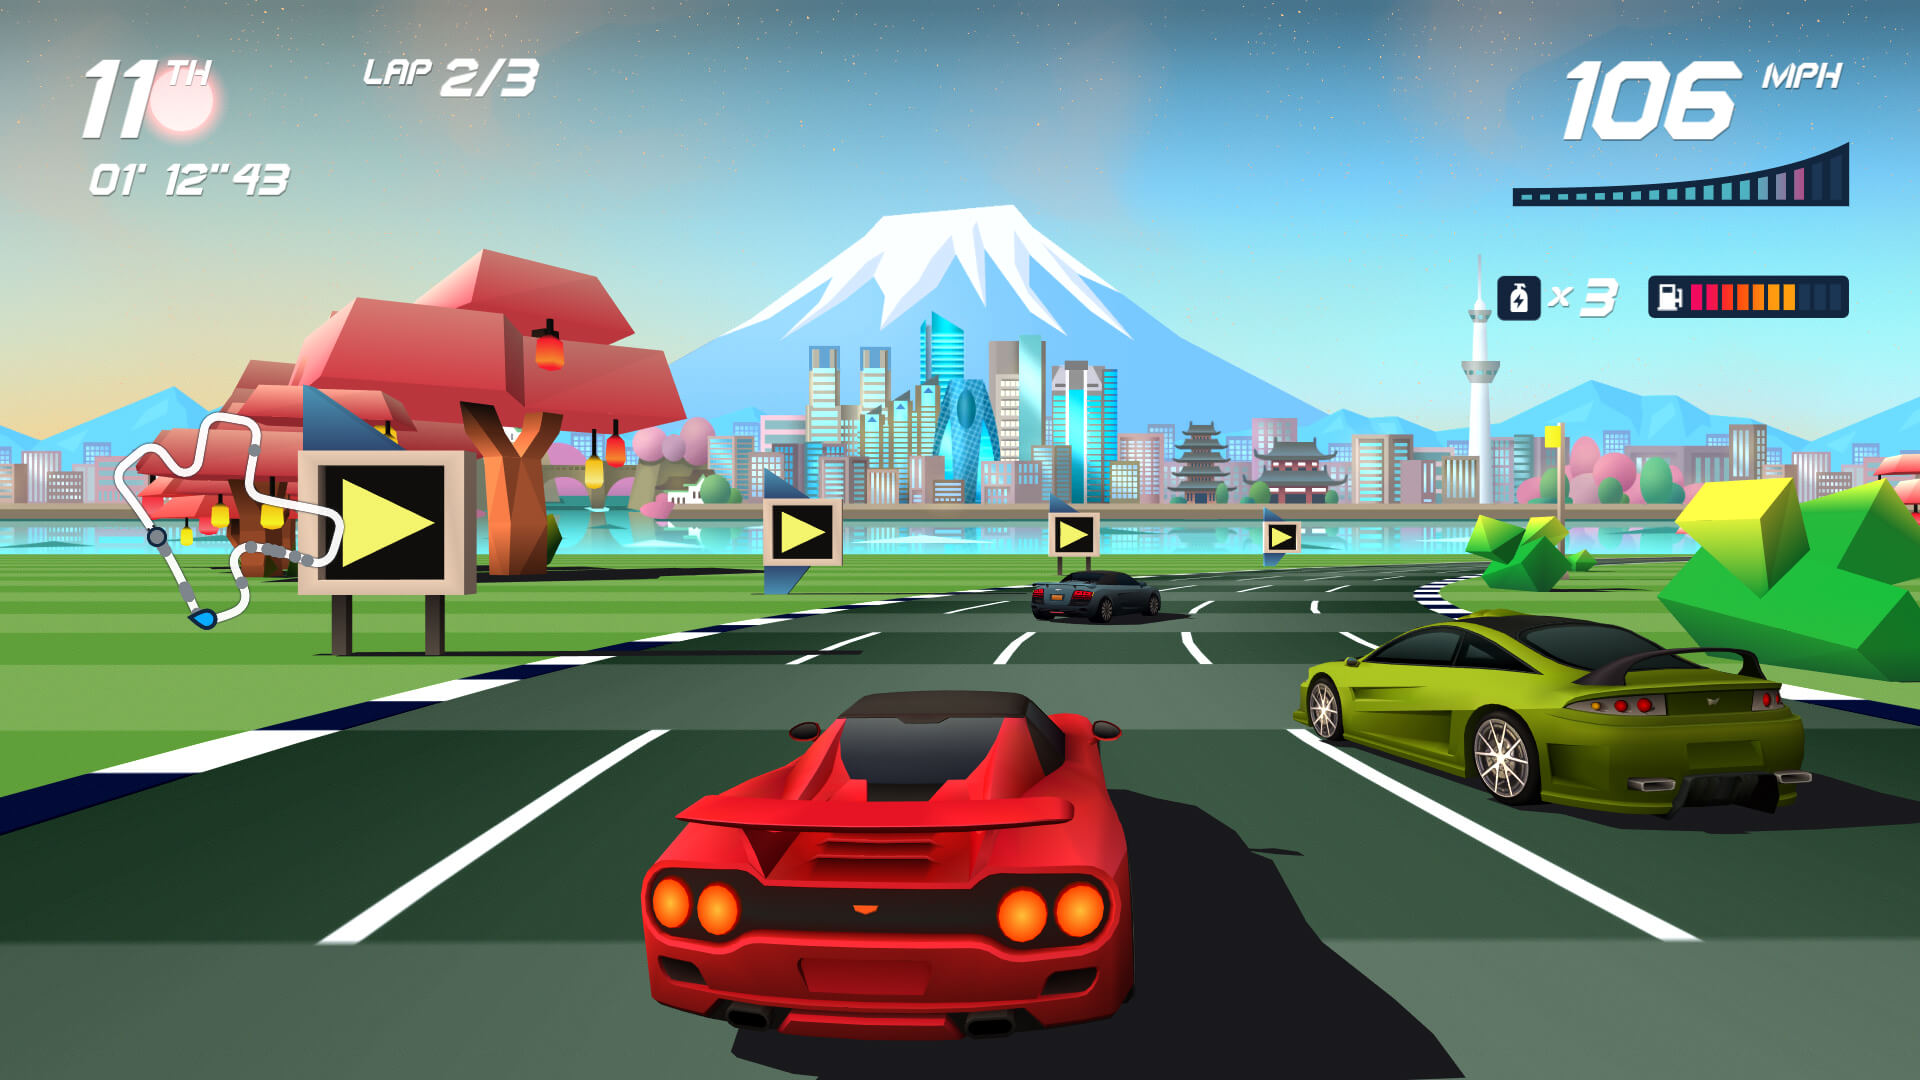 Horizon Chase Turbo, a game created by Aquiris (now Epic Games Brazil)